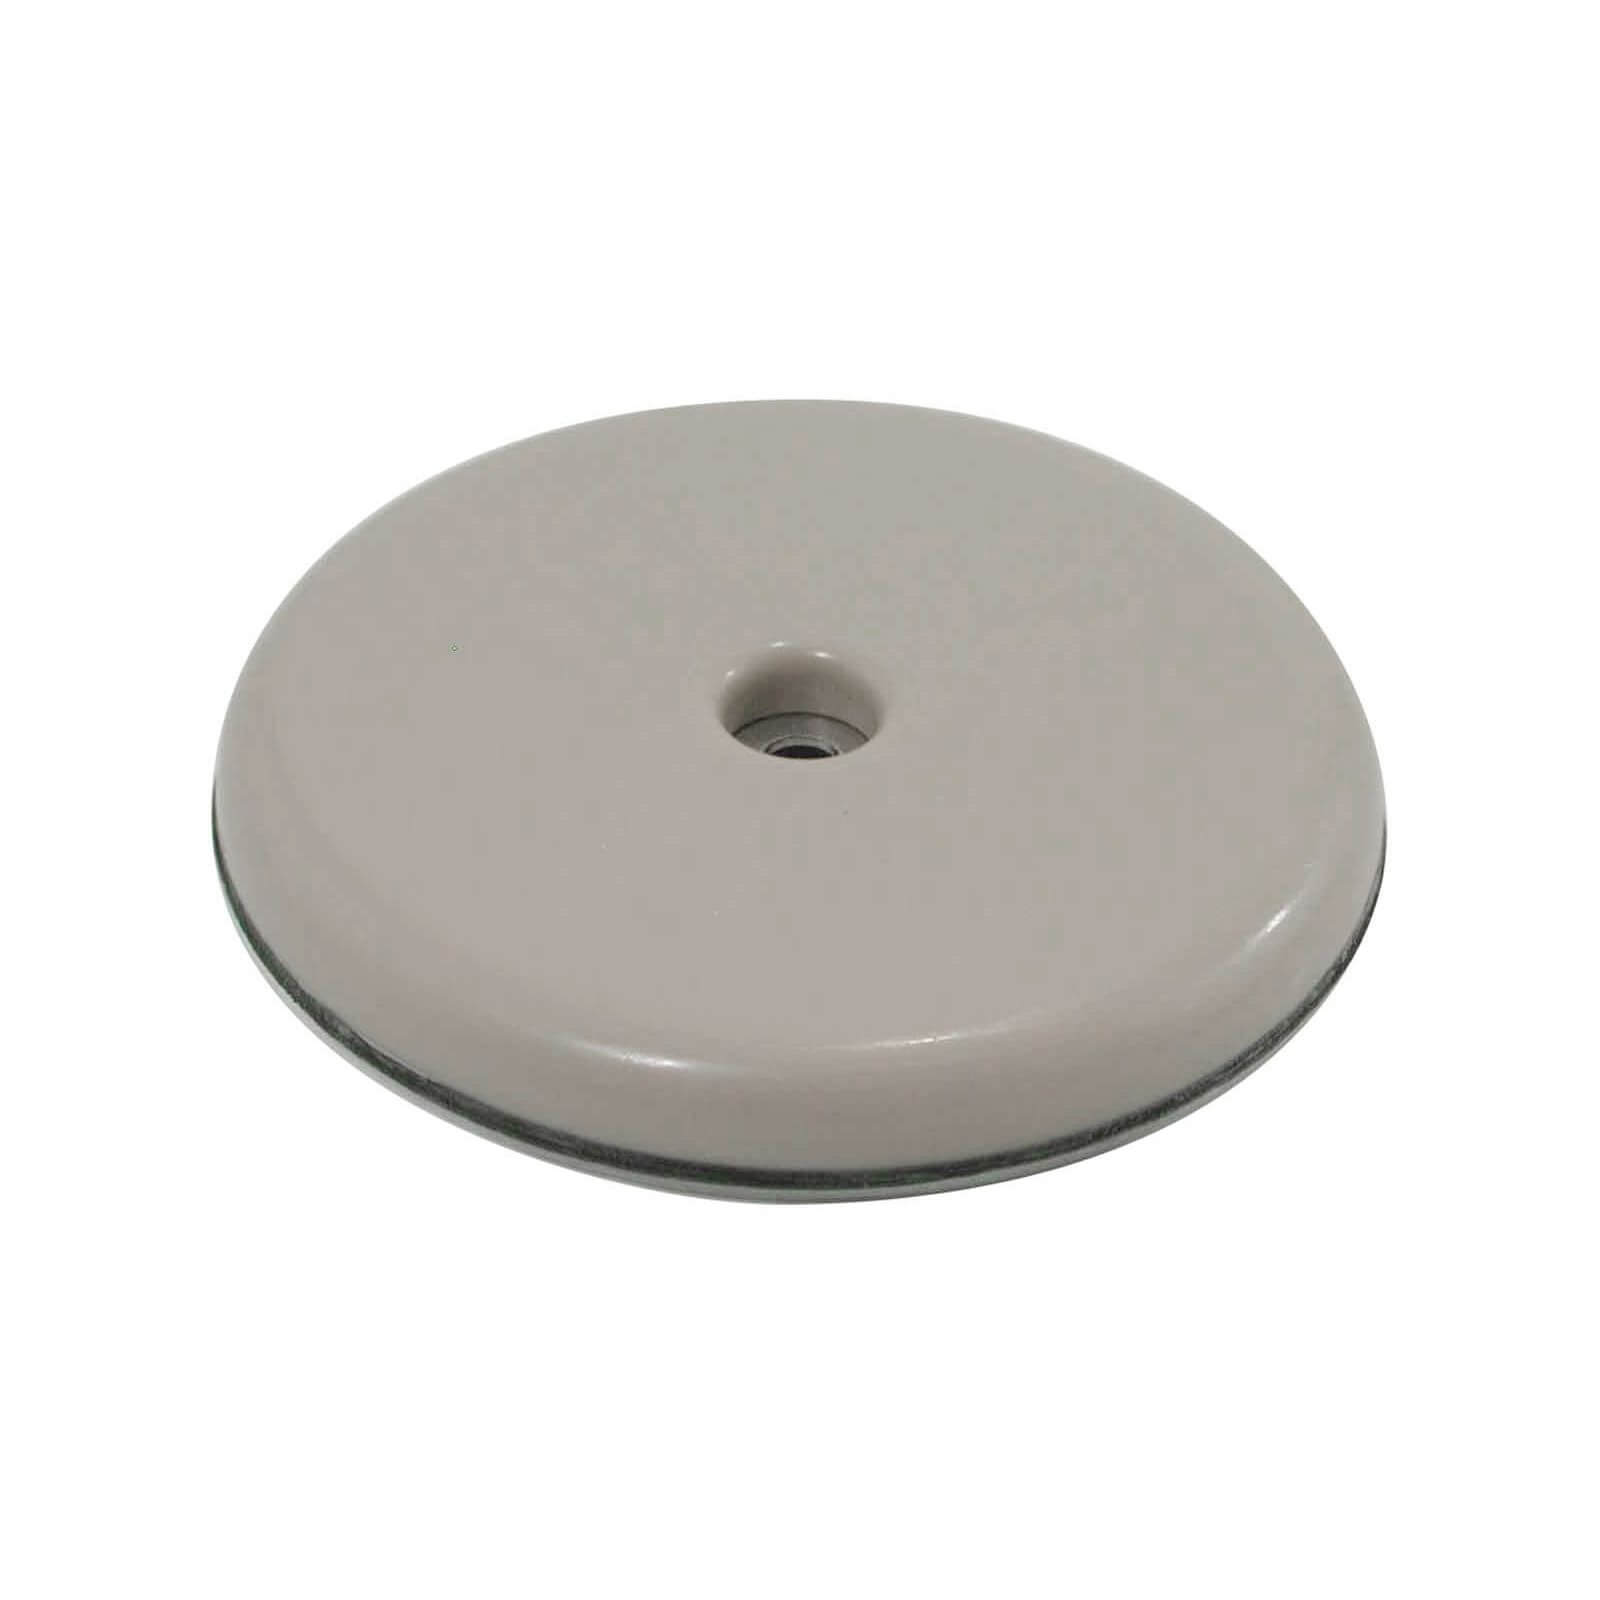 Photo of Furniture Movers - 64mm - 4 Pack